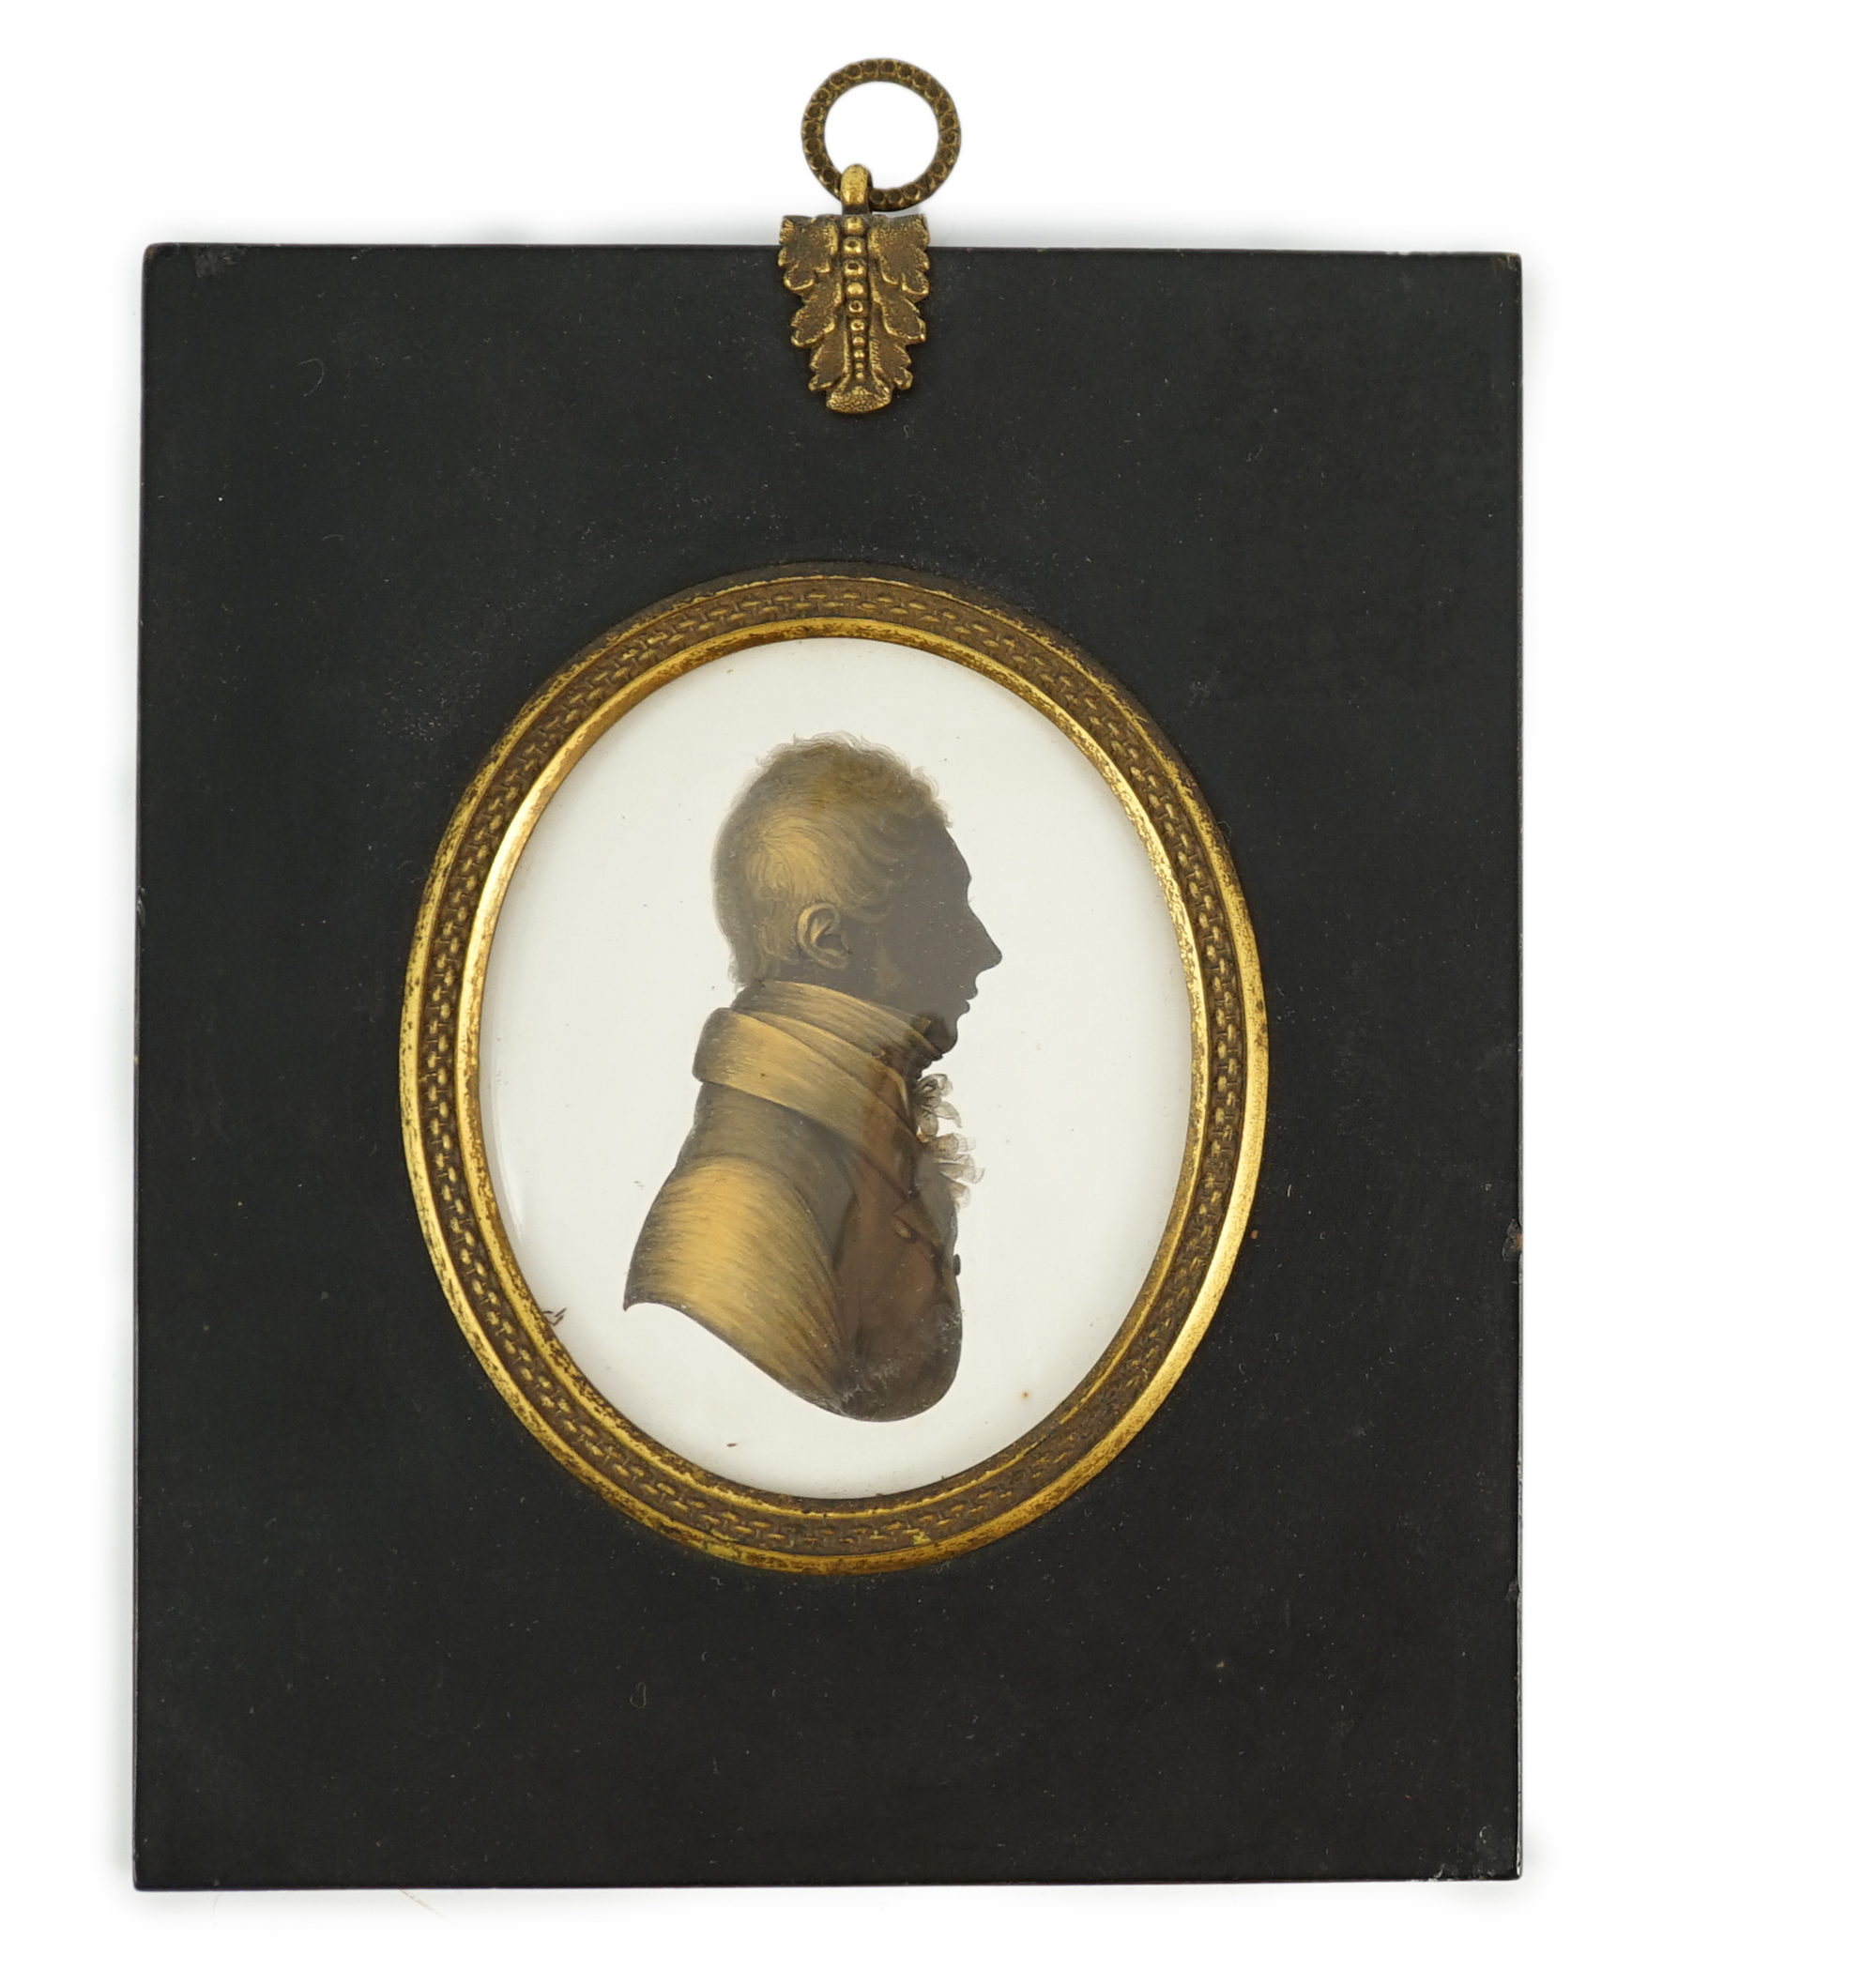 John Miers (1756-1821) , Silhouette of a gentleman, painted and bronzed plaster, 8 x 6.5cm.